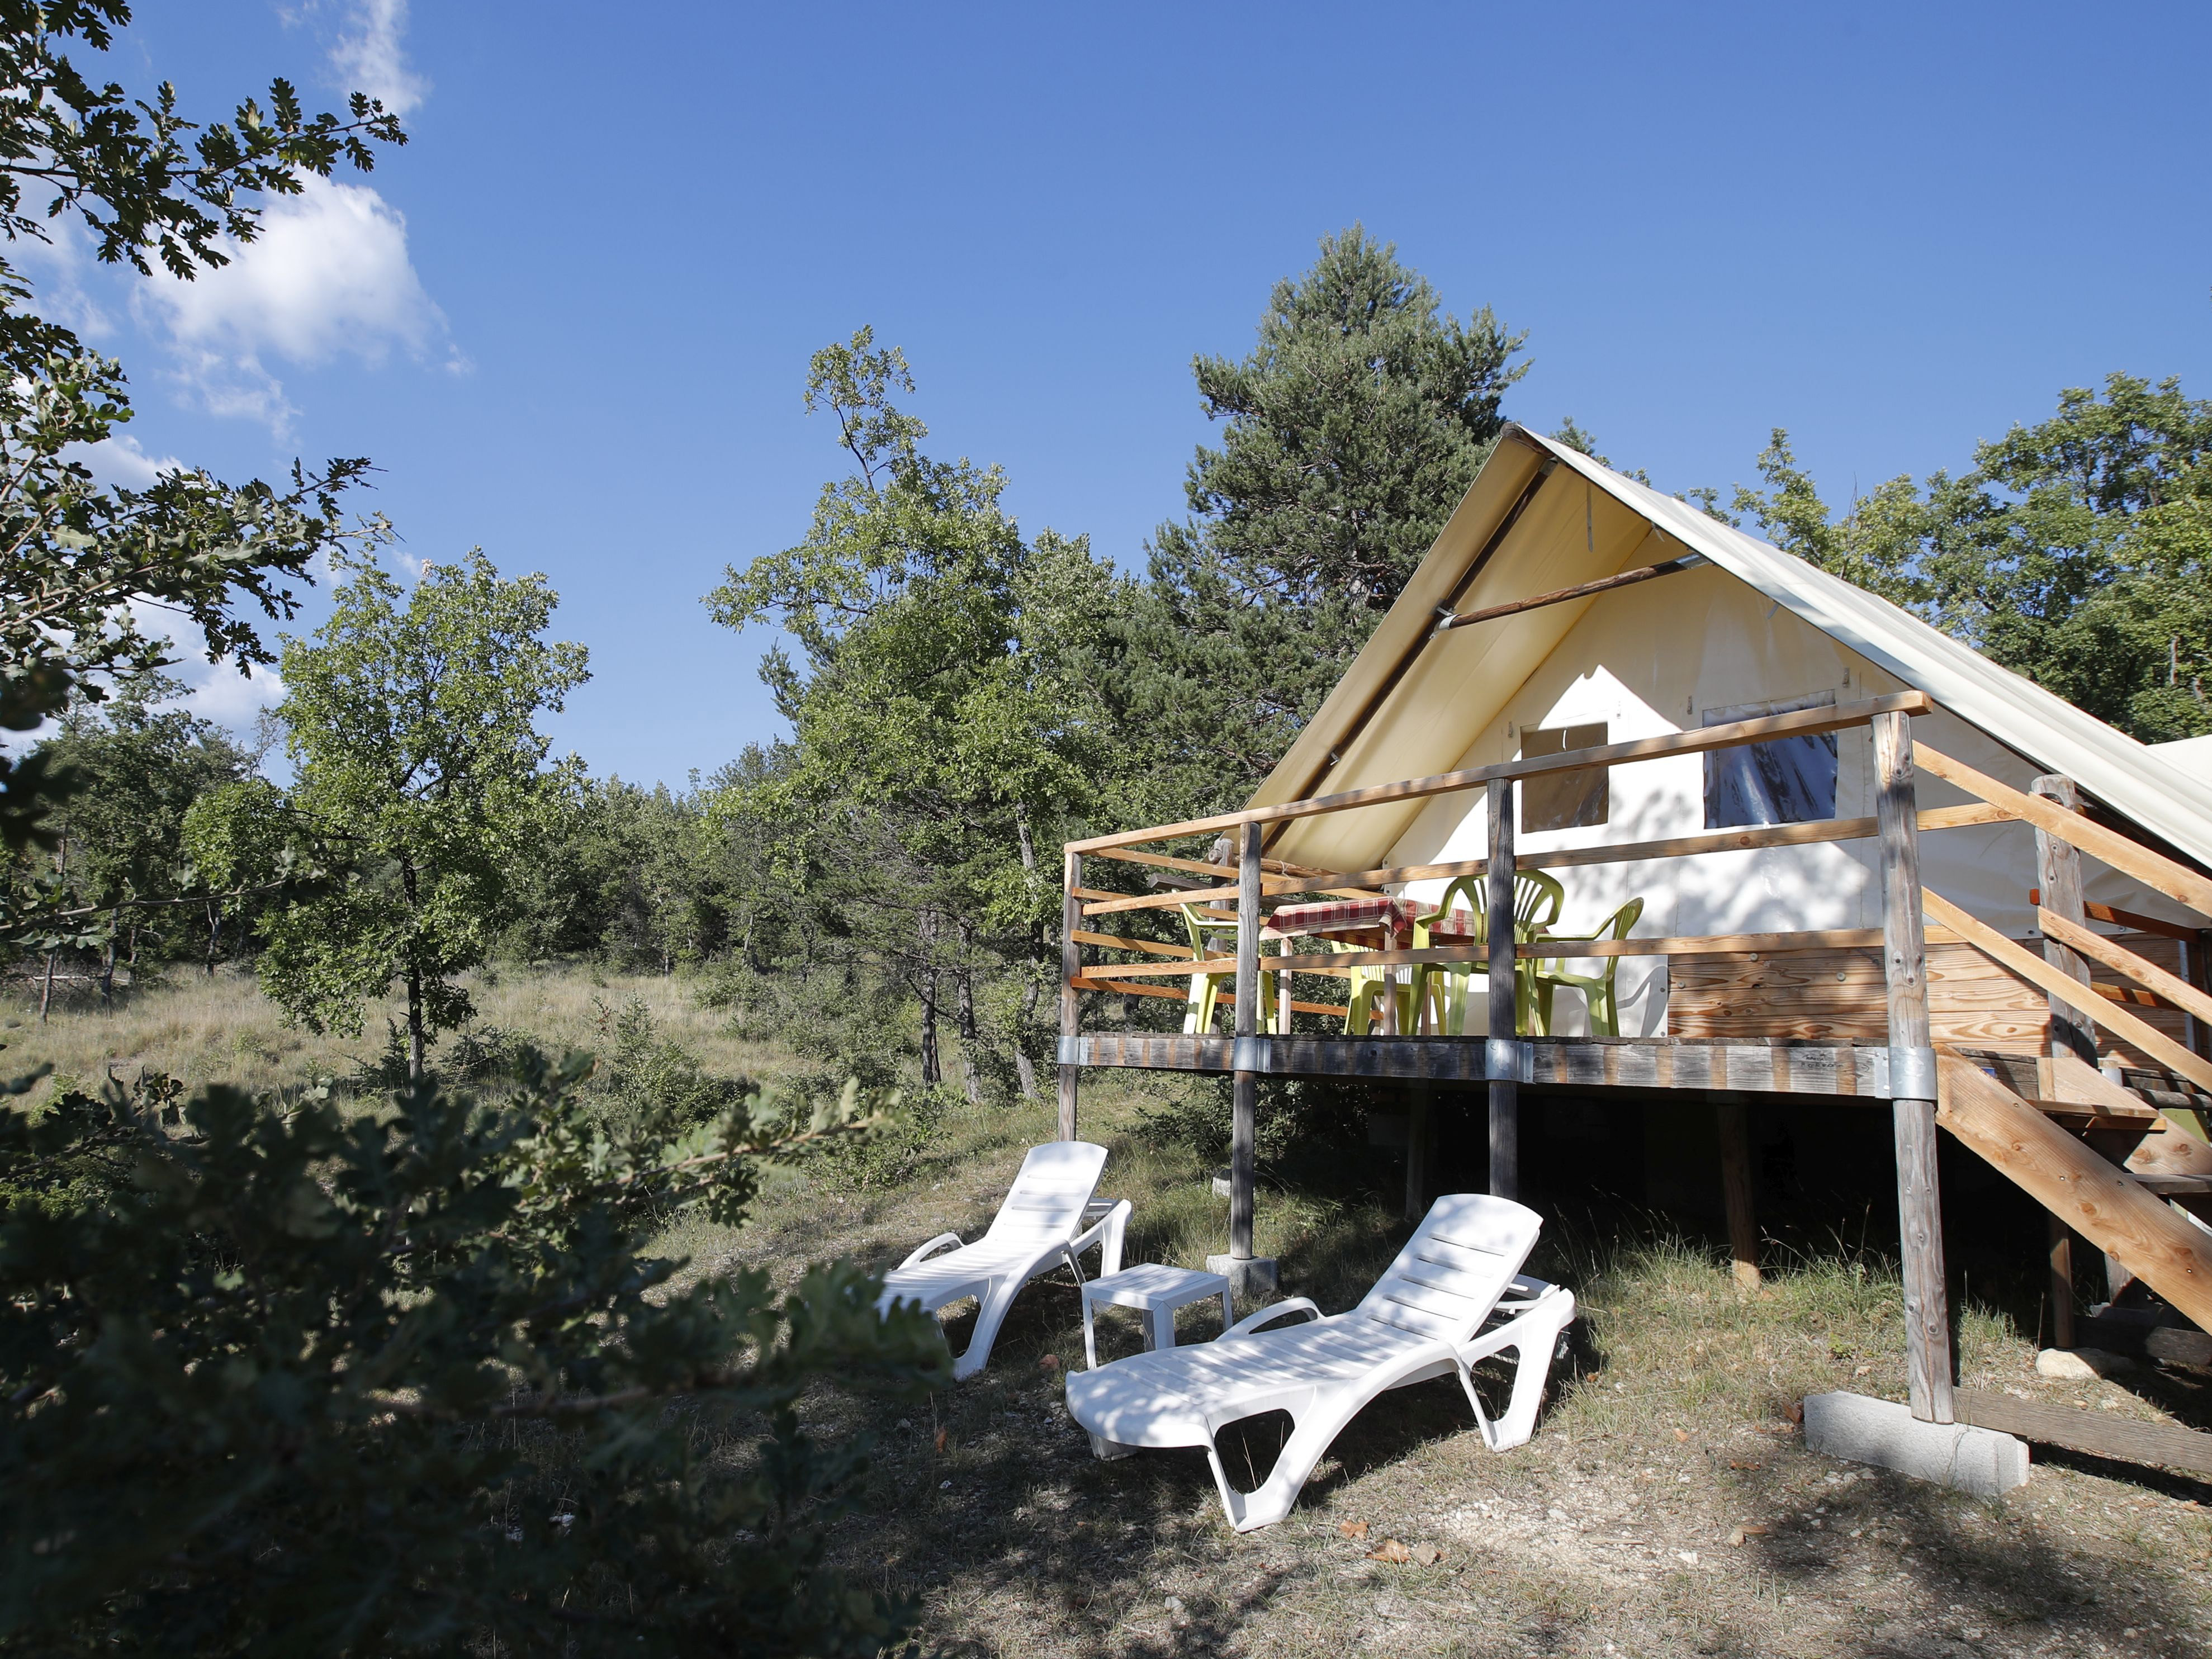 franzosisch-camping Camping naturiste Les Lauzons Forcalquier